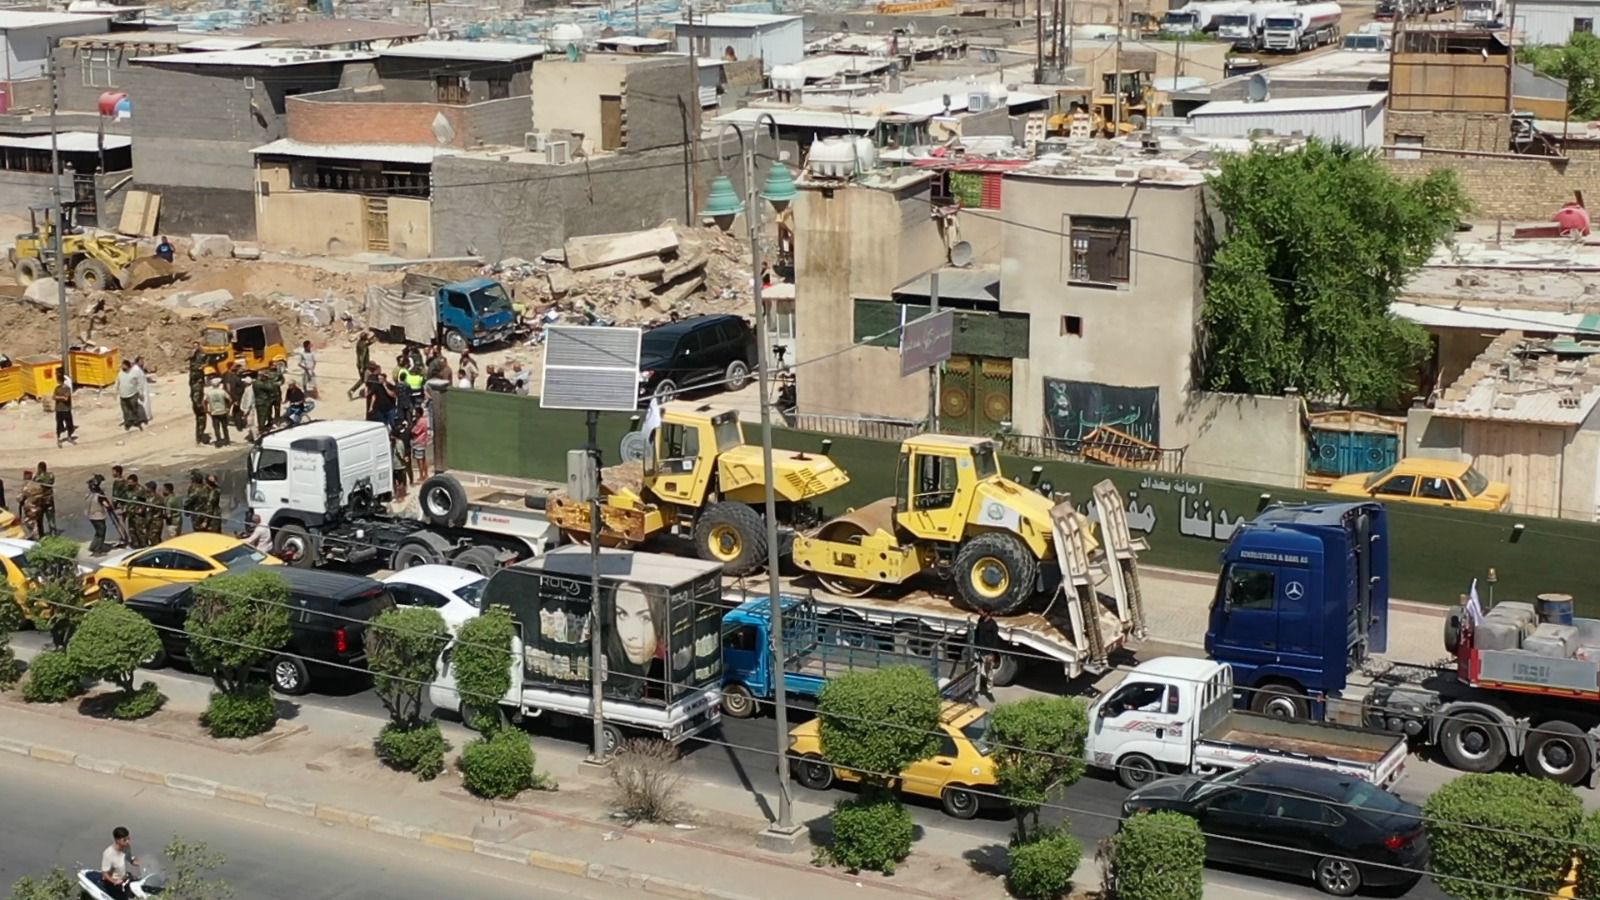 Armed groups block service and engineering vehicles in Al-Sadr City, Baghdad